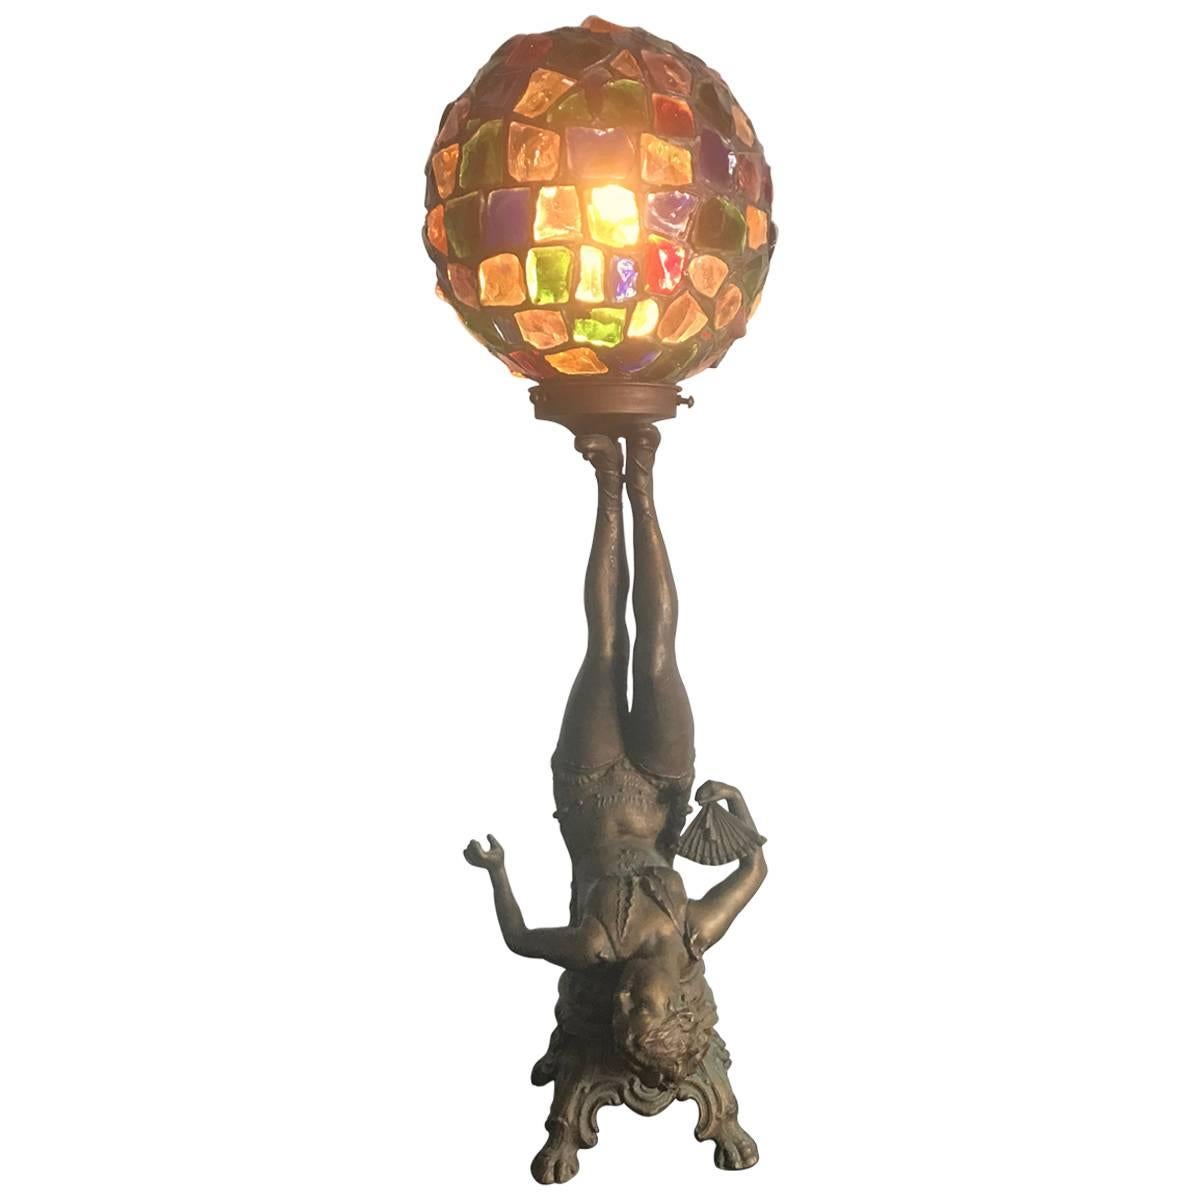 Art Deco Figural Lamp with Original Glass Nugget Shade